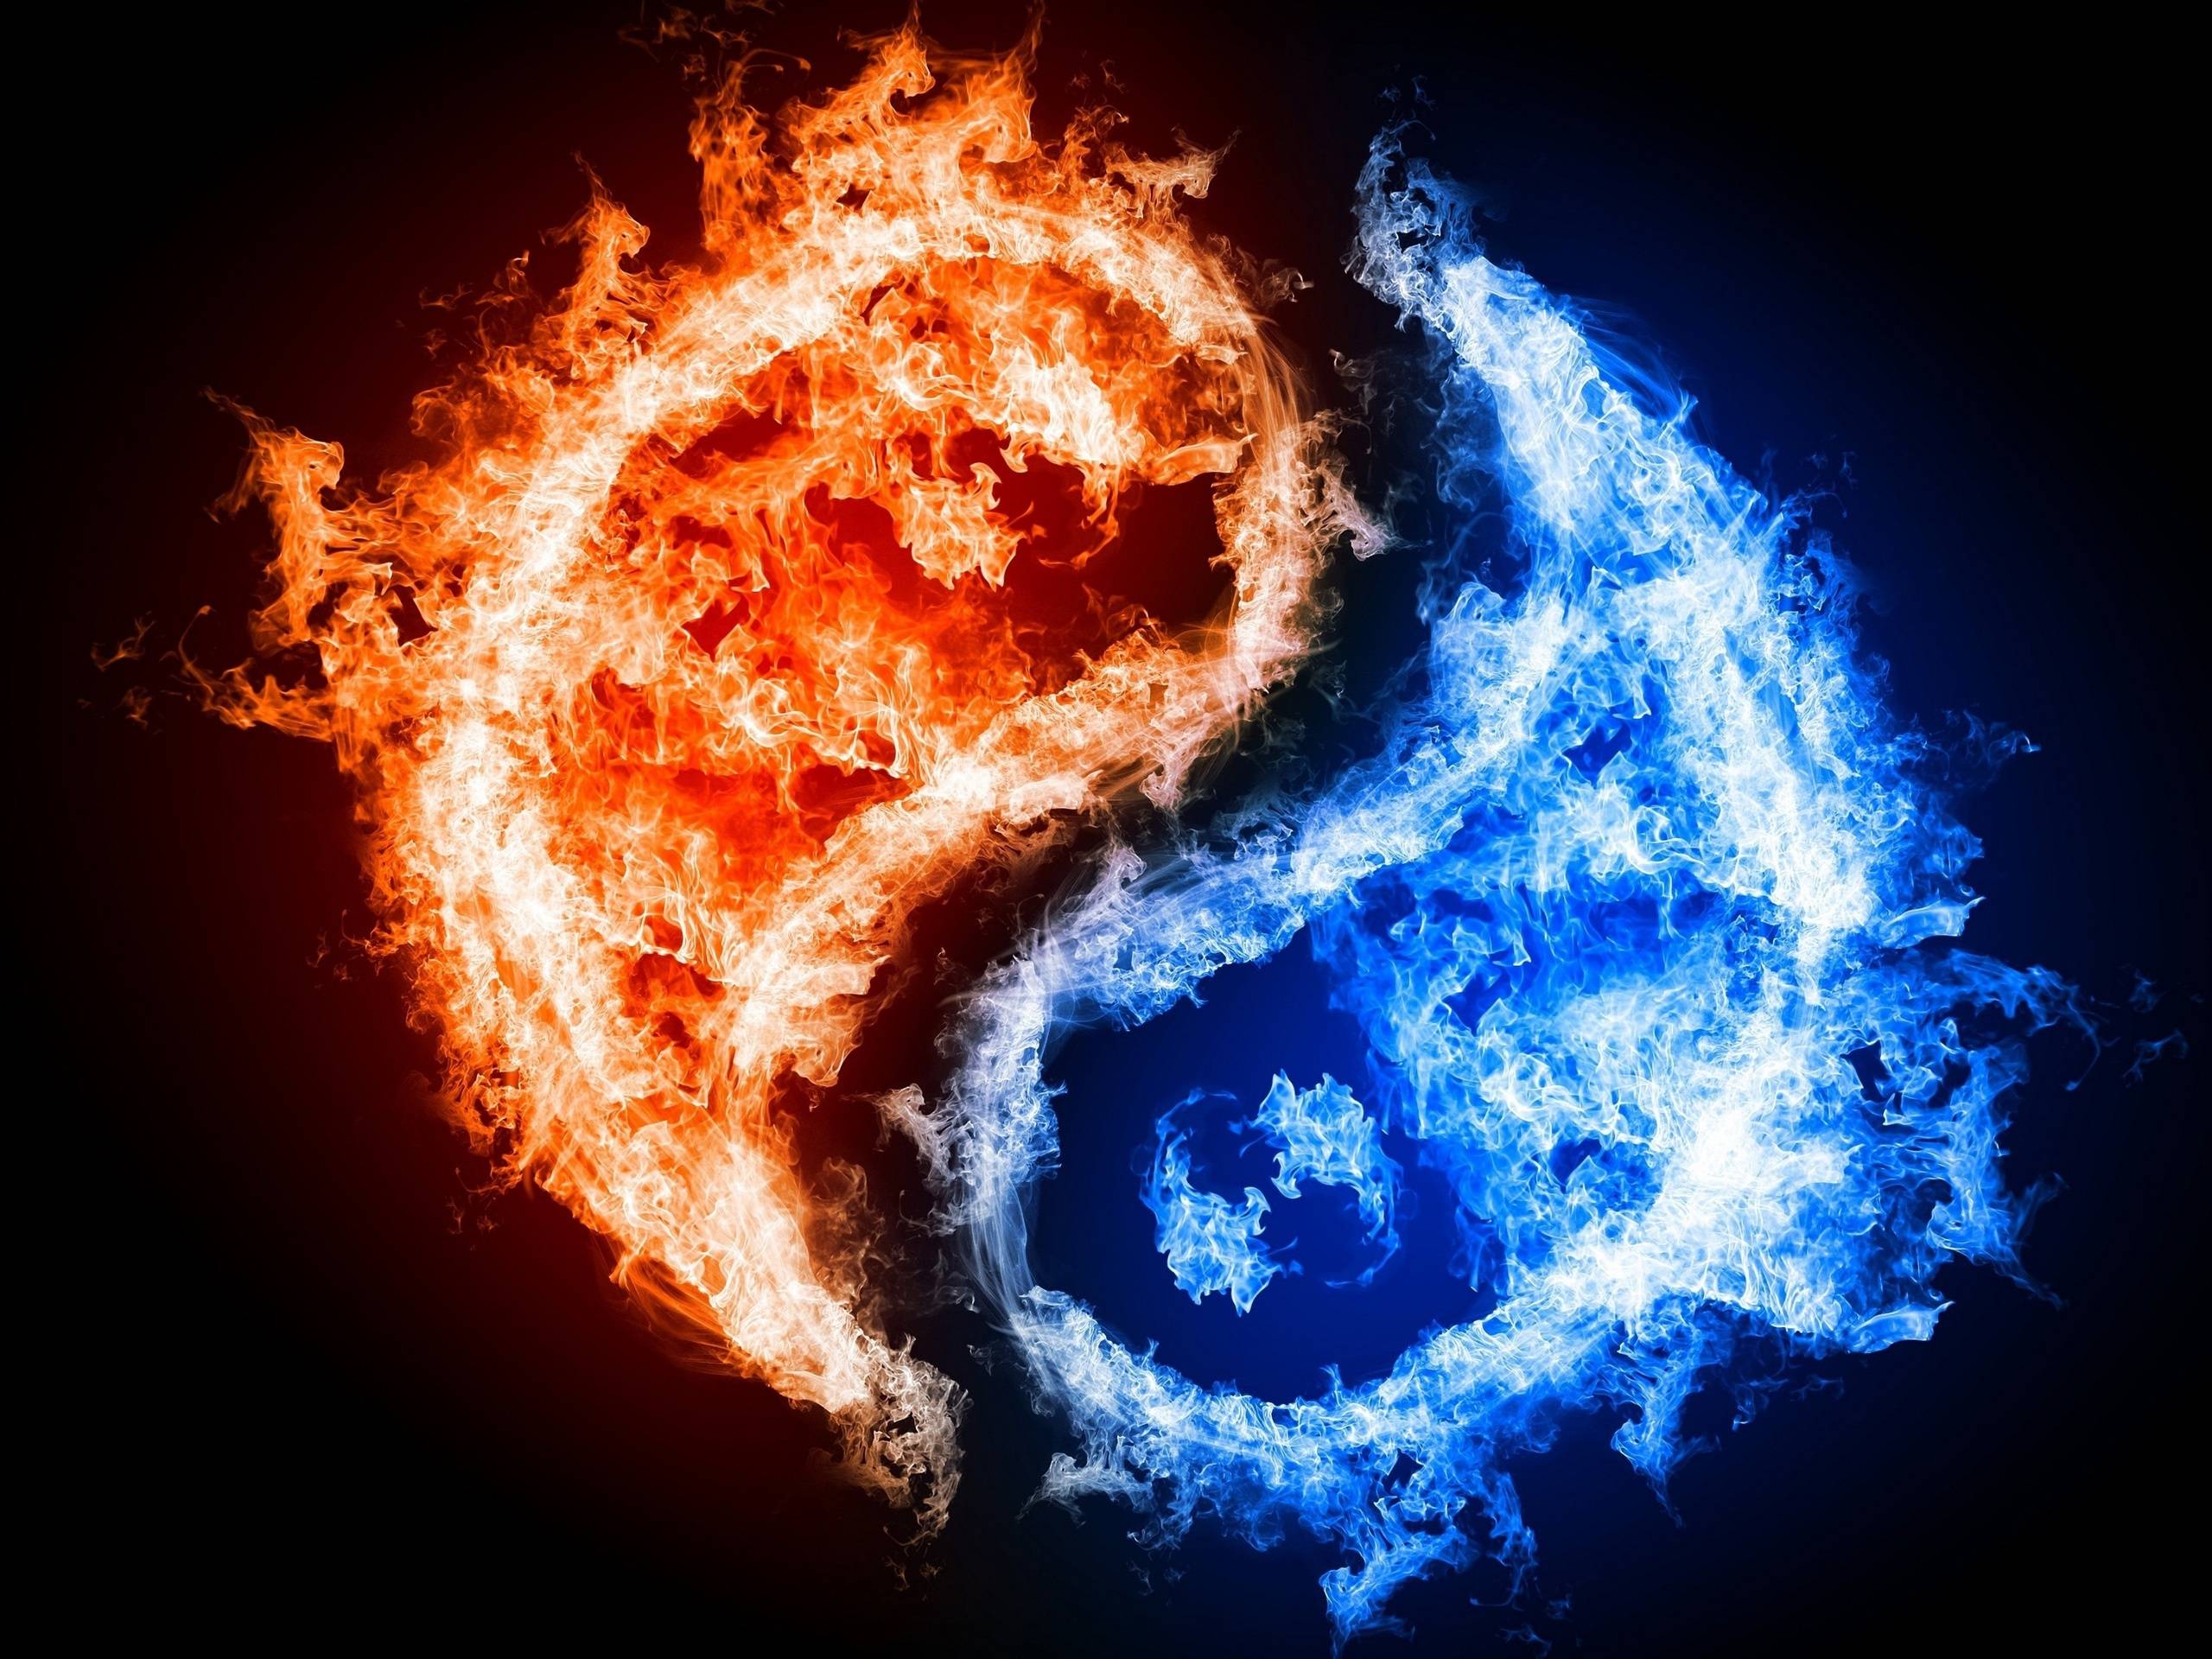 Wallpaper For > Red And Blue Flames Wallpaper